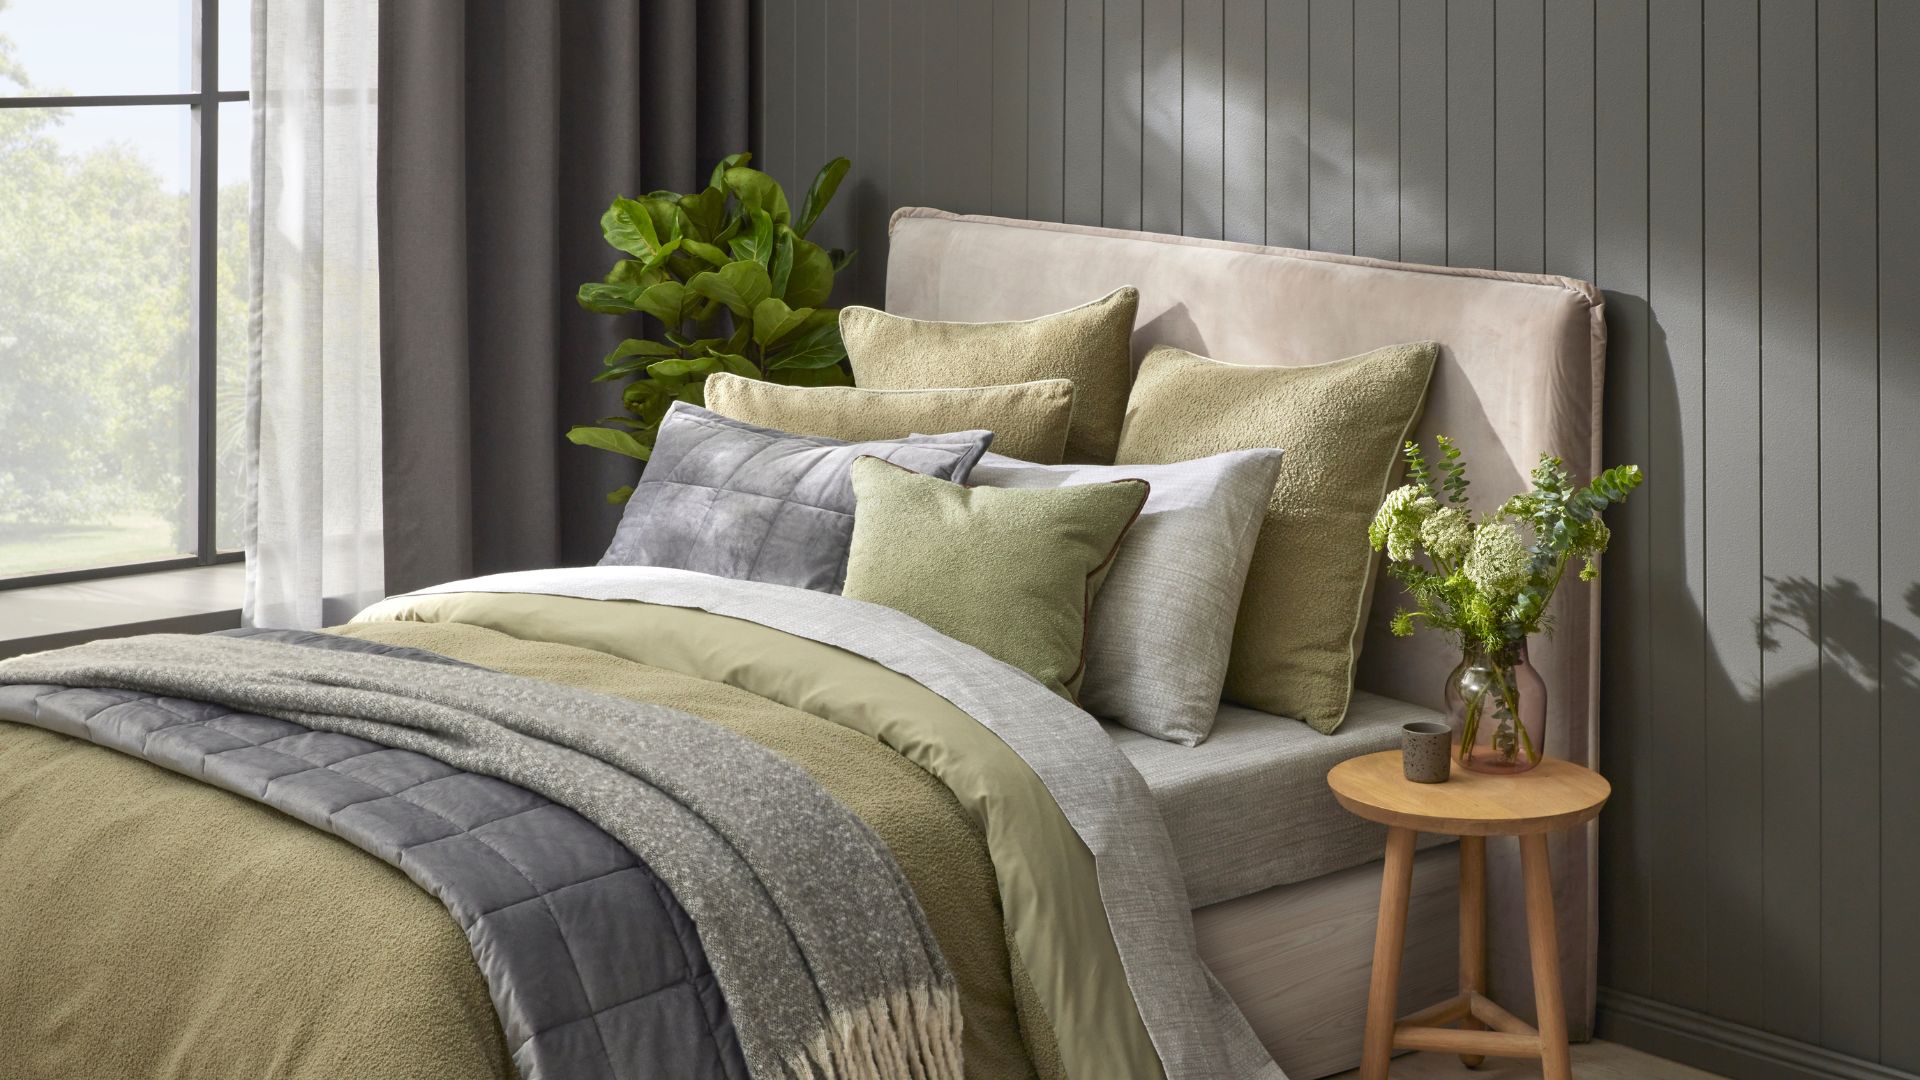 Discover the Sophisticated Warwick Home Range at Spotlight